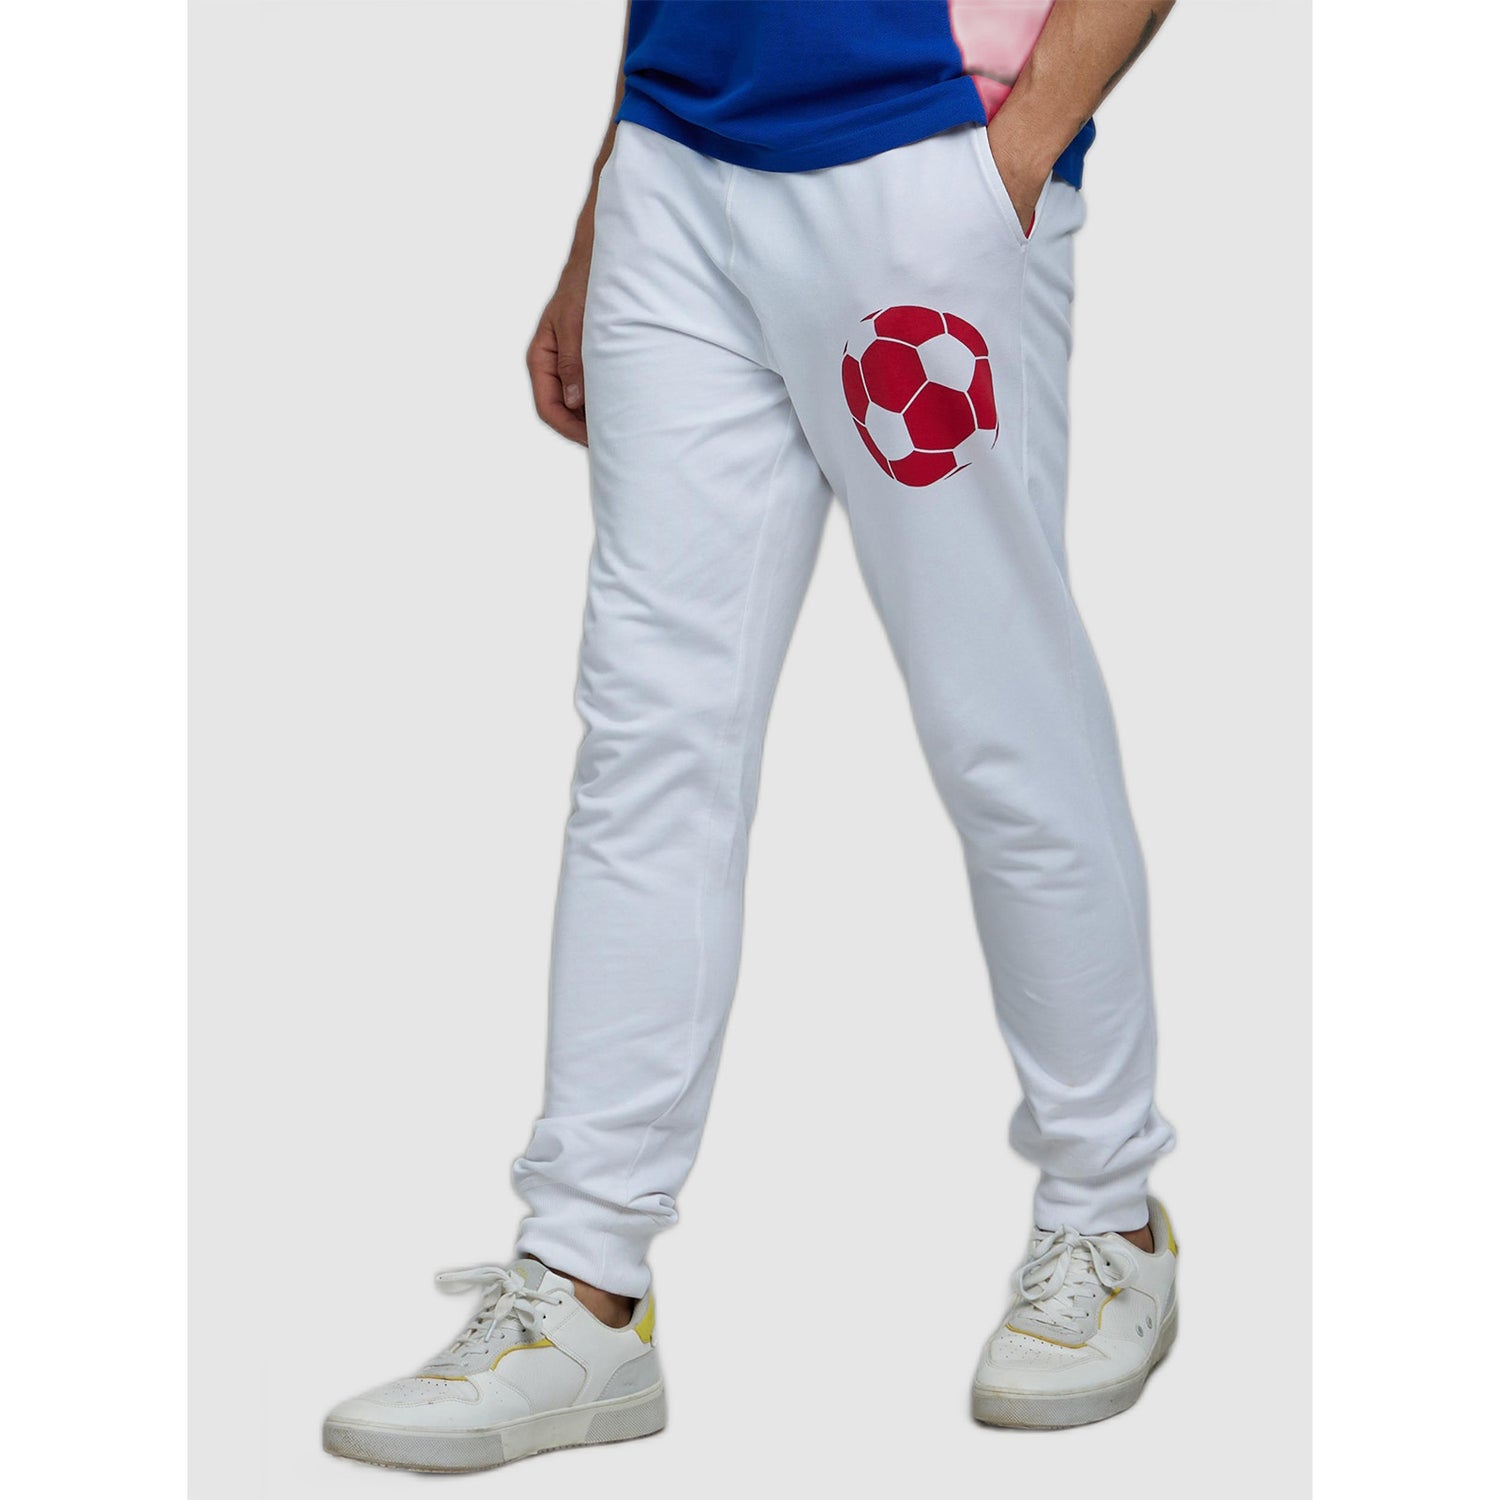 FIFA - White Cotton Regular Fit Sports Joggers (LCEFIFAJG2)